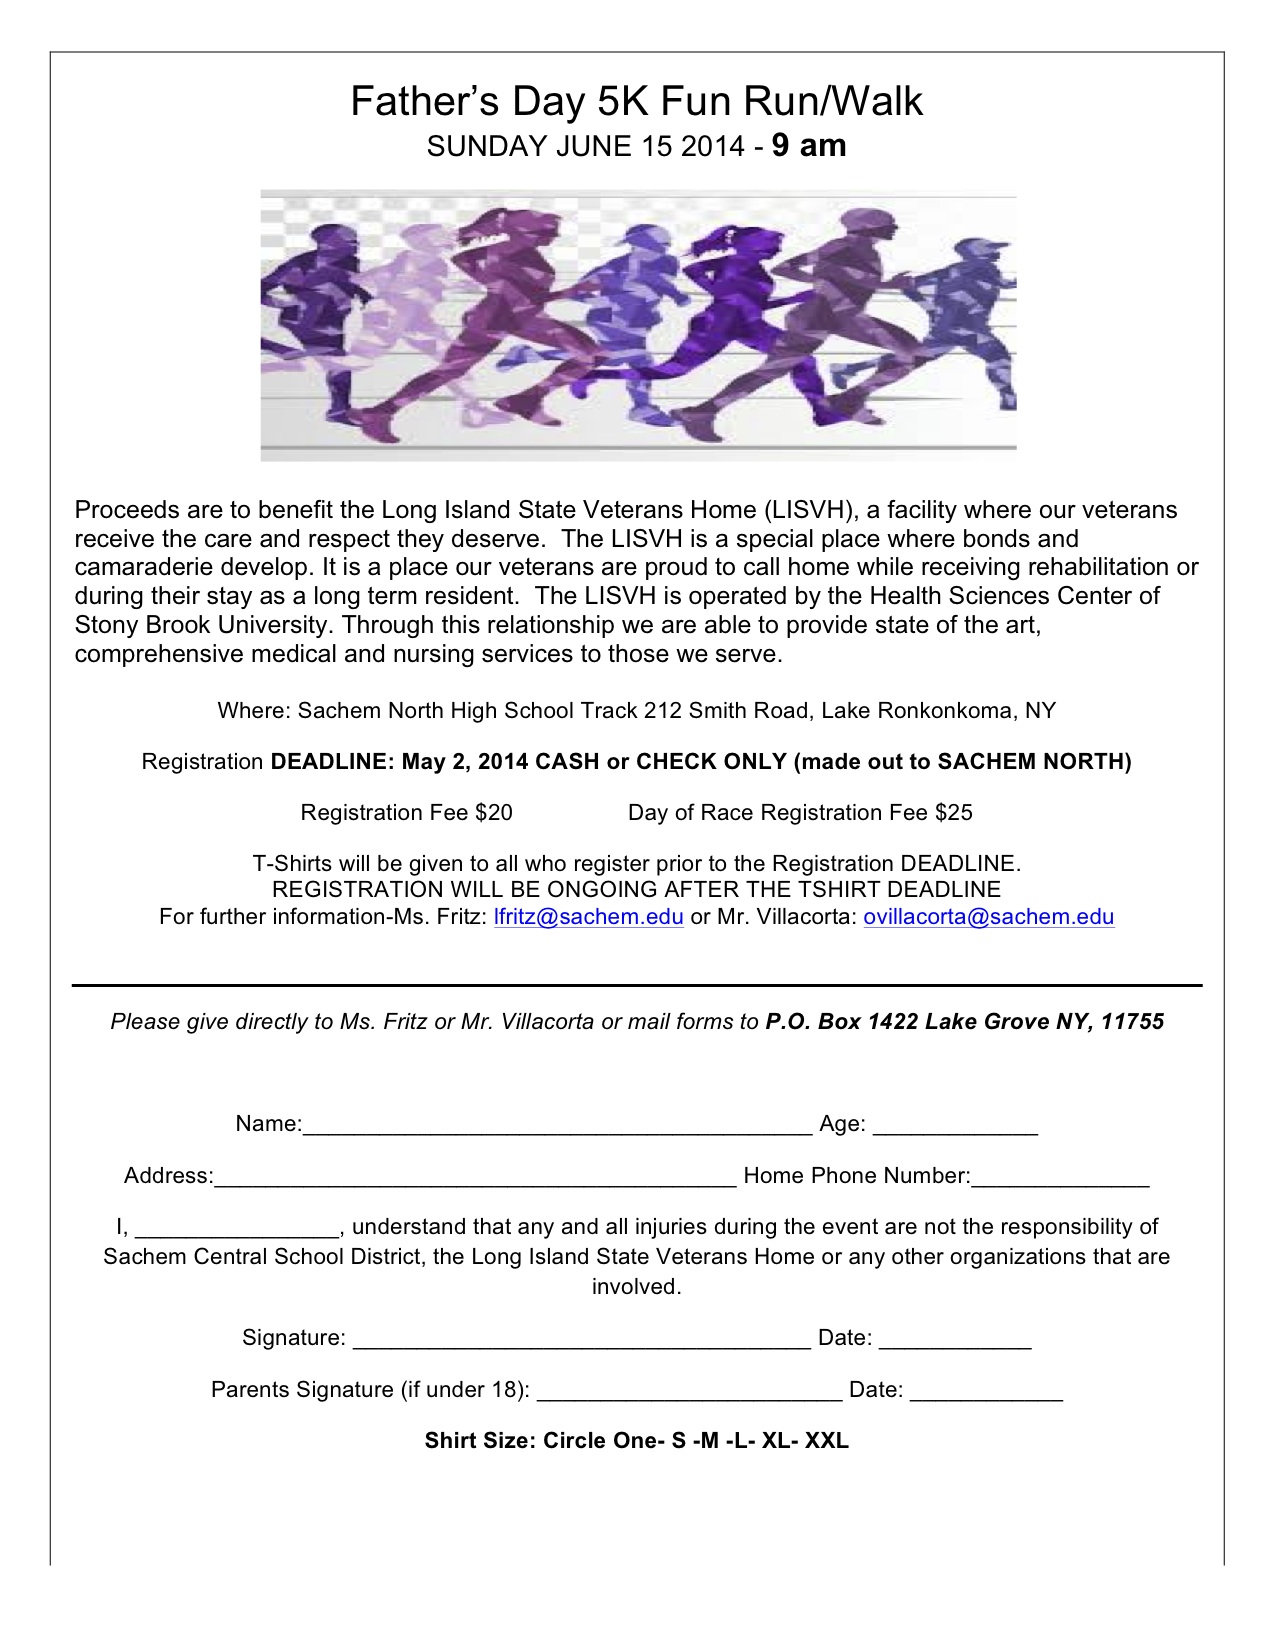 Event: Father’s Day 5K Run at Sachem North | Sachem Report